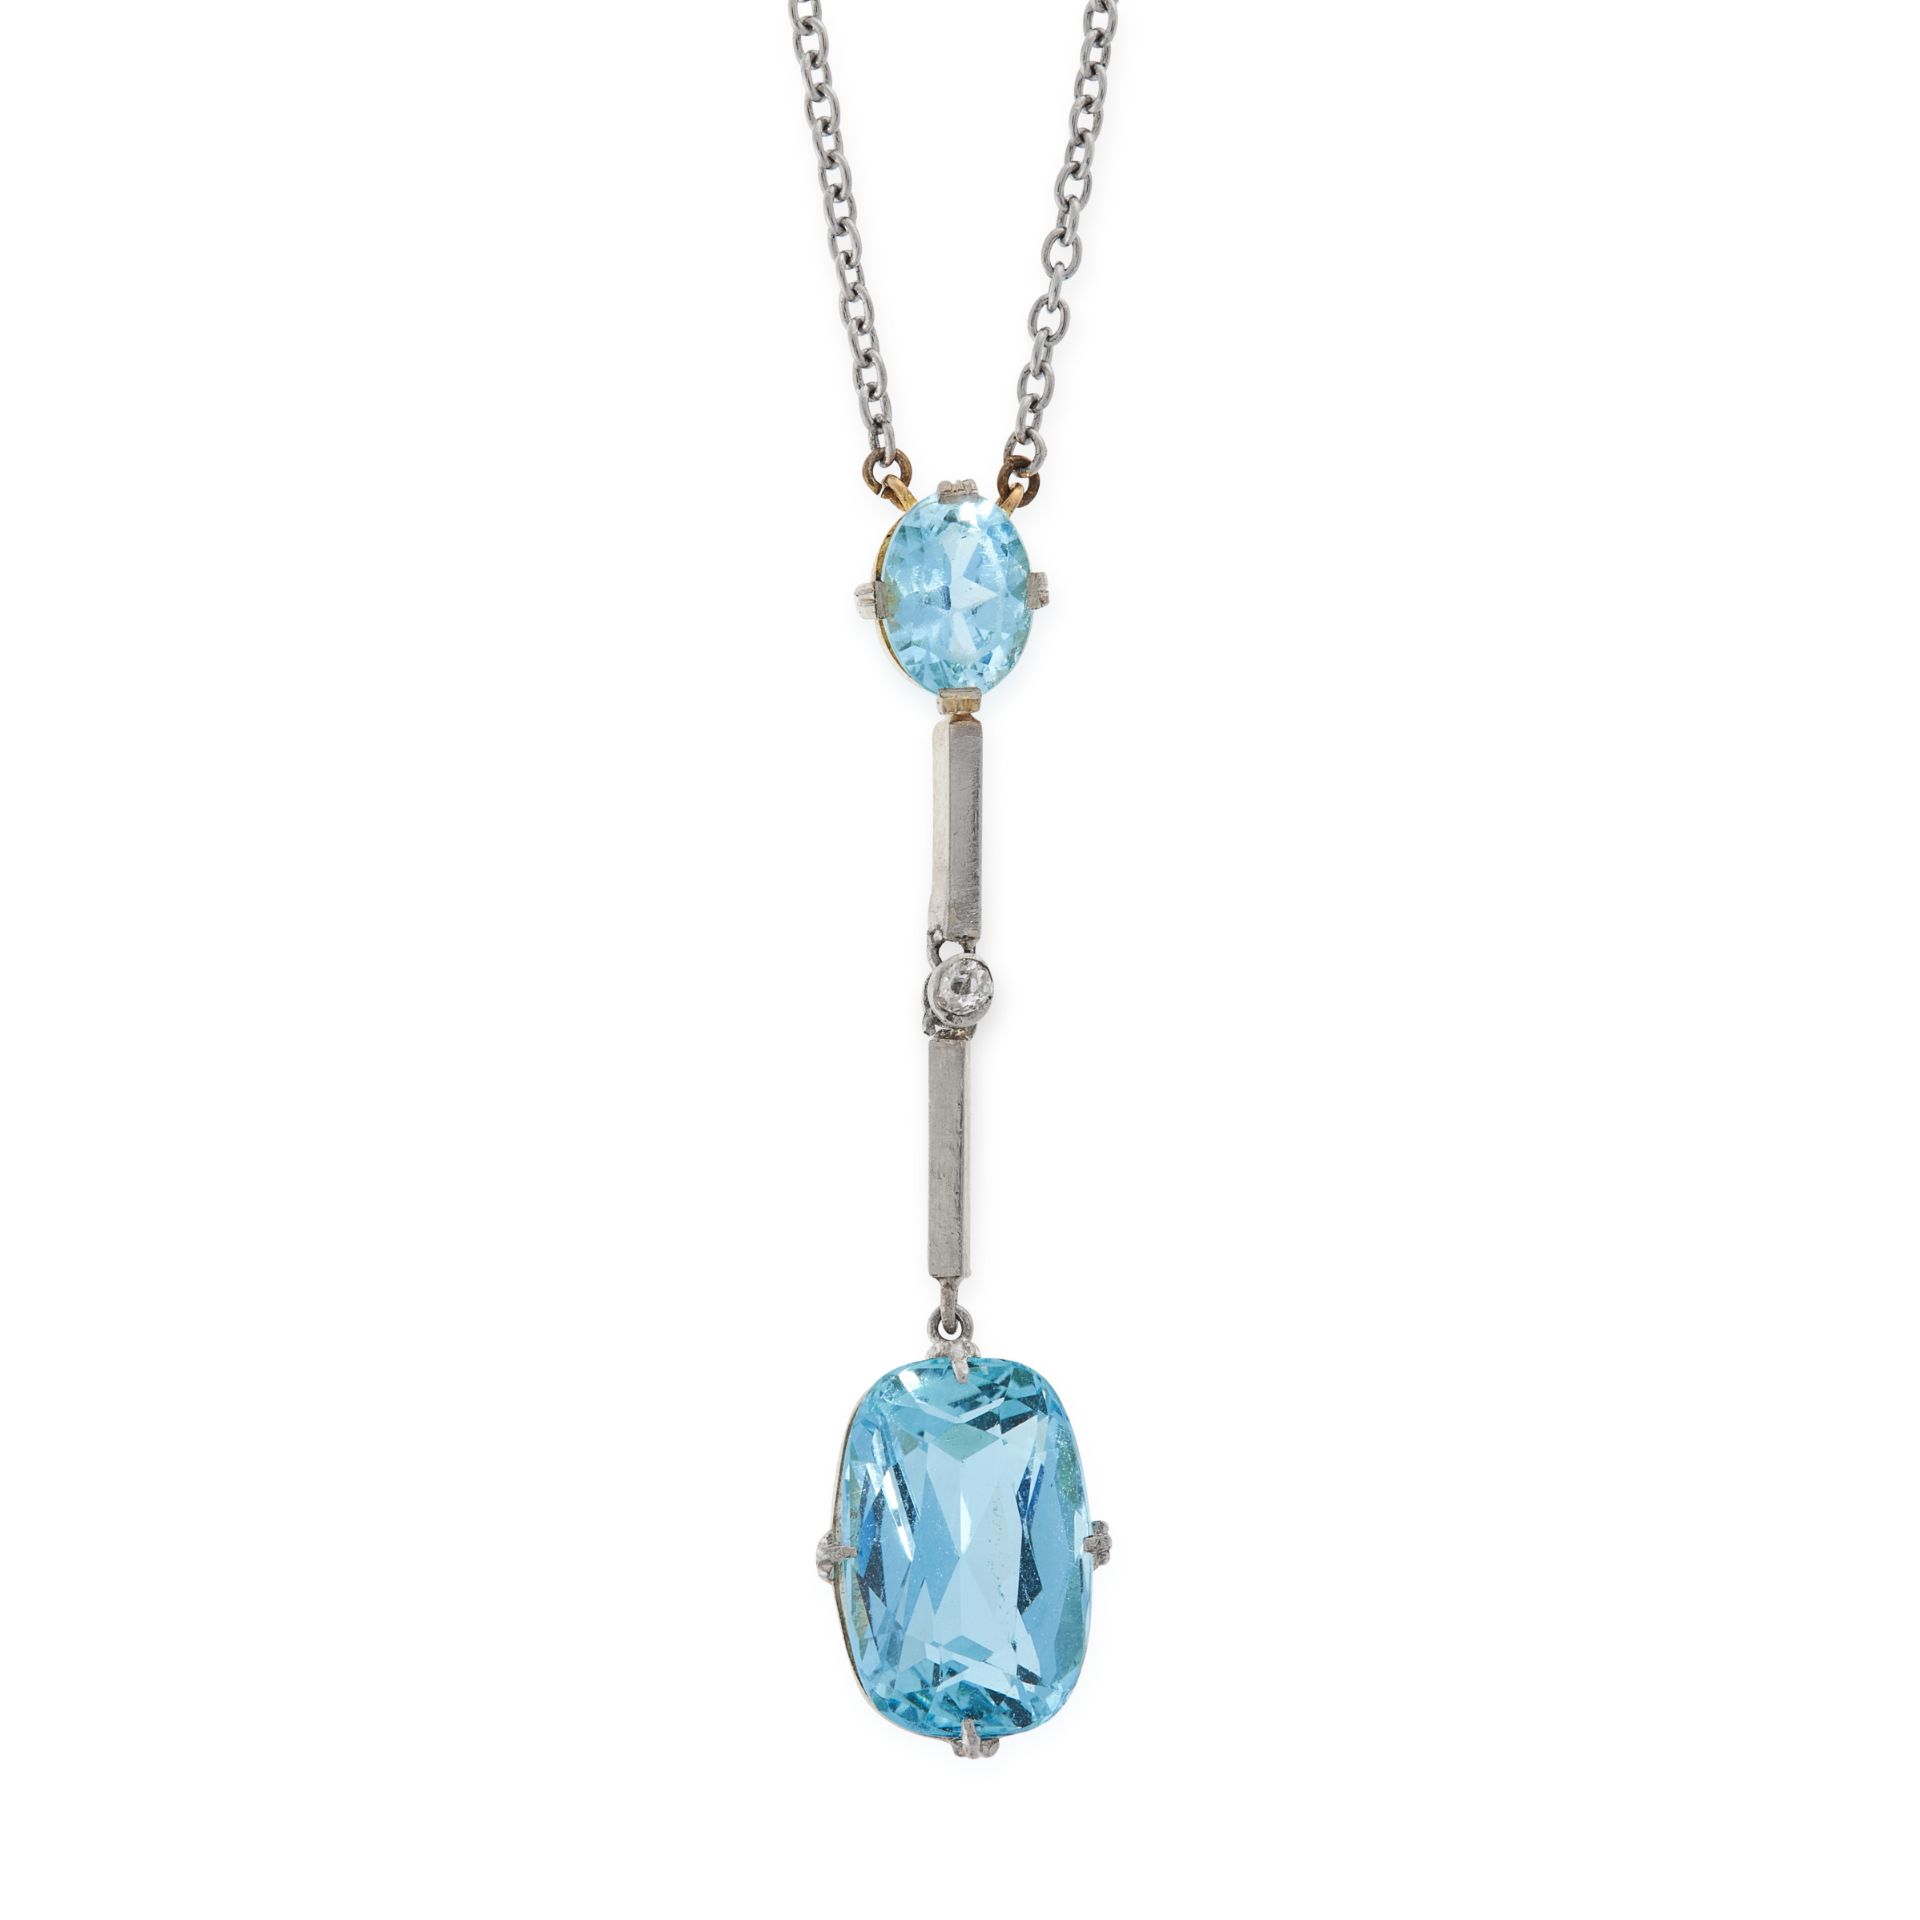 AN AQUAMARINE AND DIAMOND PENDANT NECKLACE, EARLY 20TH CENTURY in platinum and yellow gold, set with